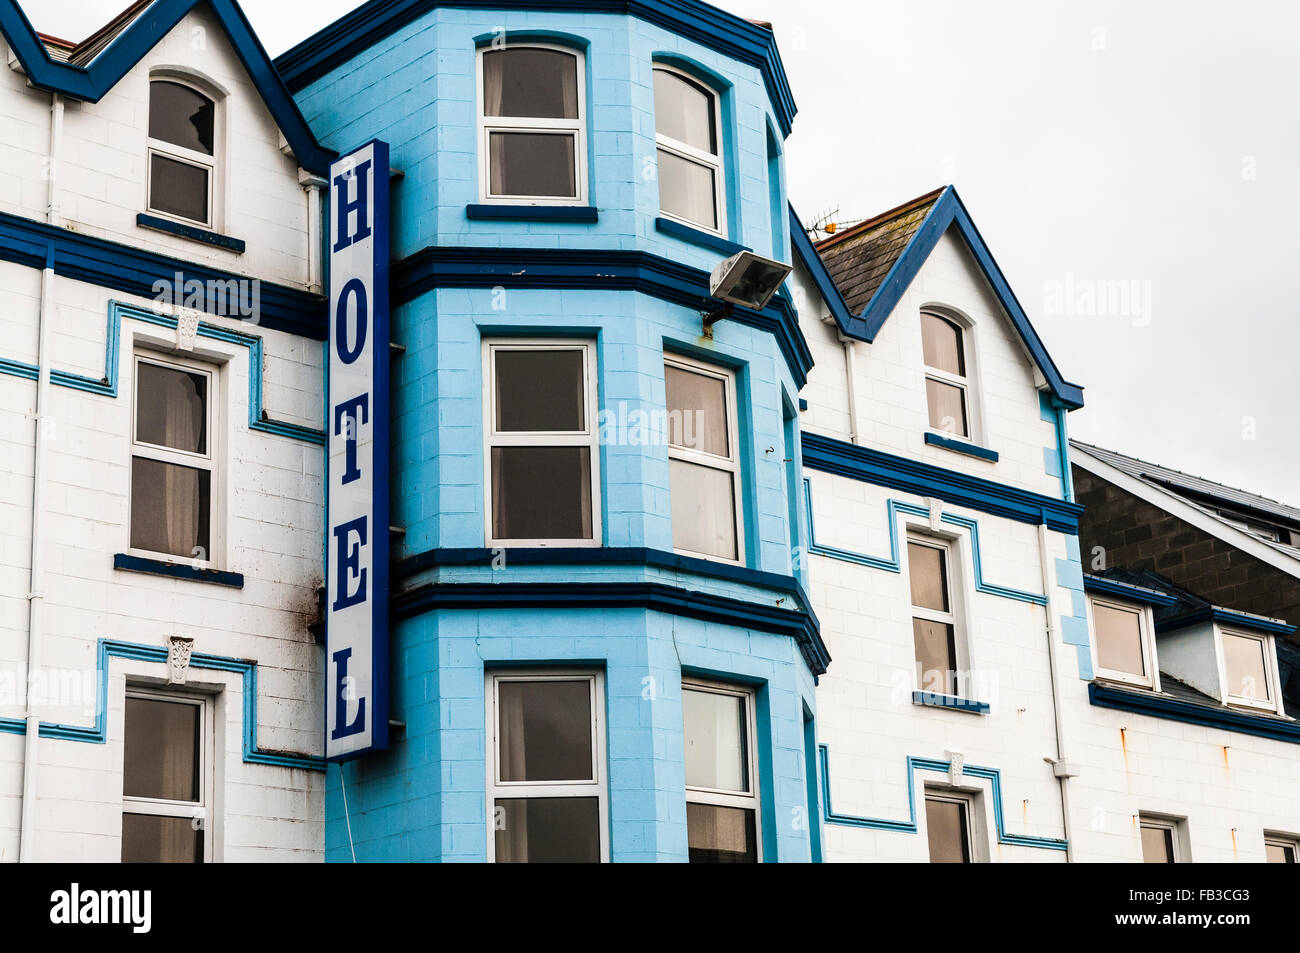 Sign at a Northern Ireland seaside hotel Stock Photo